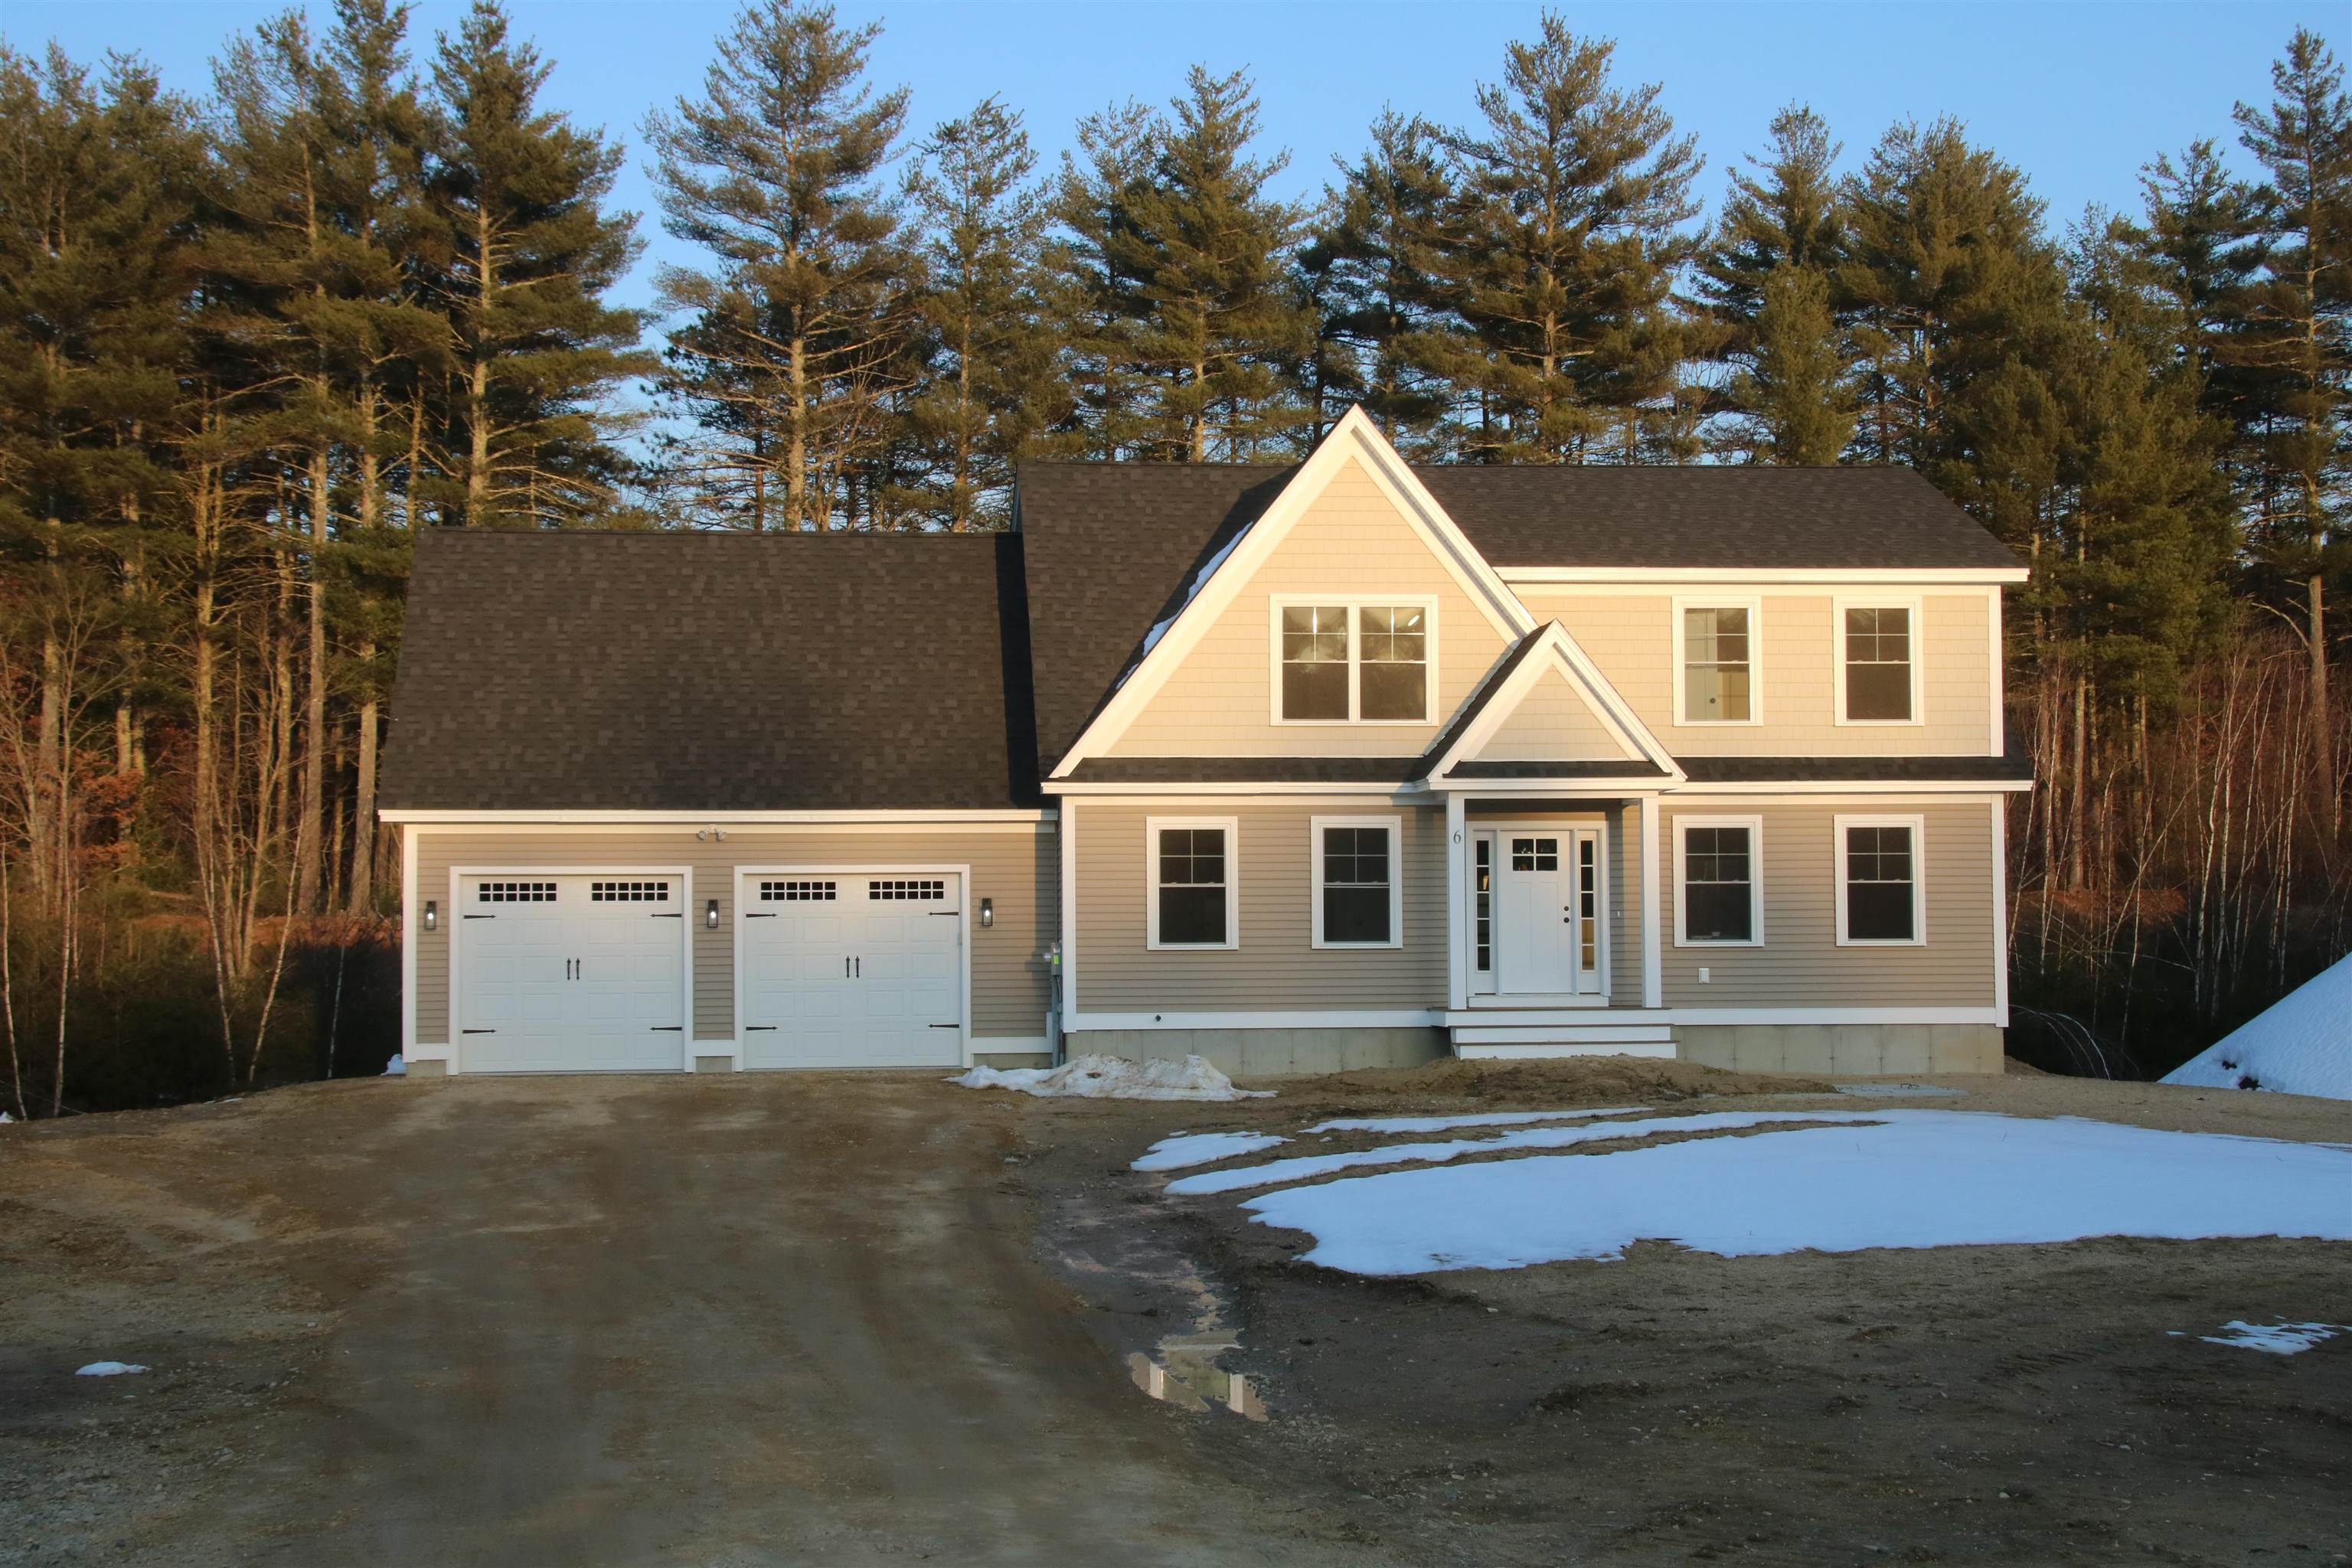 Lot 8 Woodland Hollow Road, Lee, NH 03861